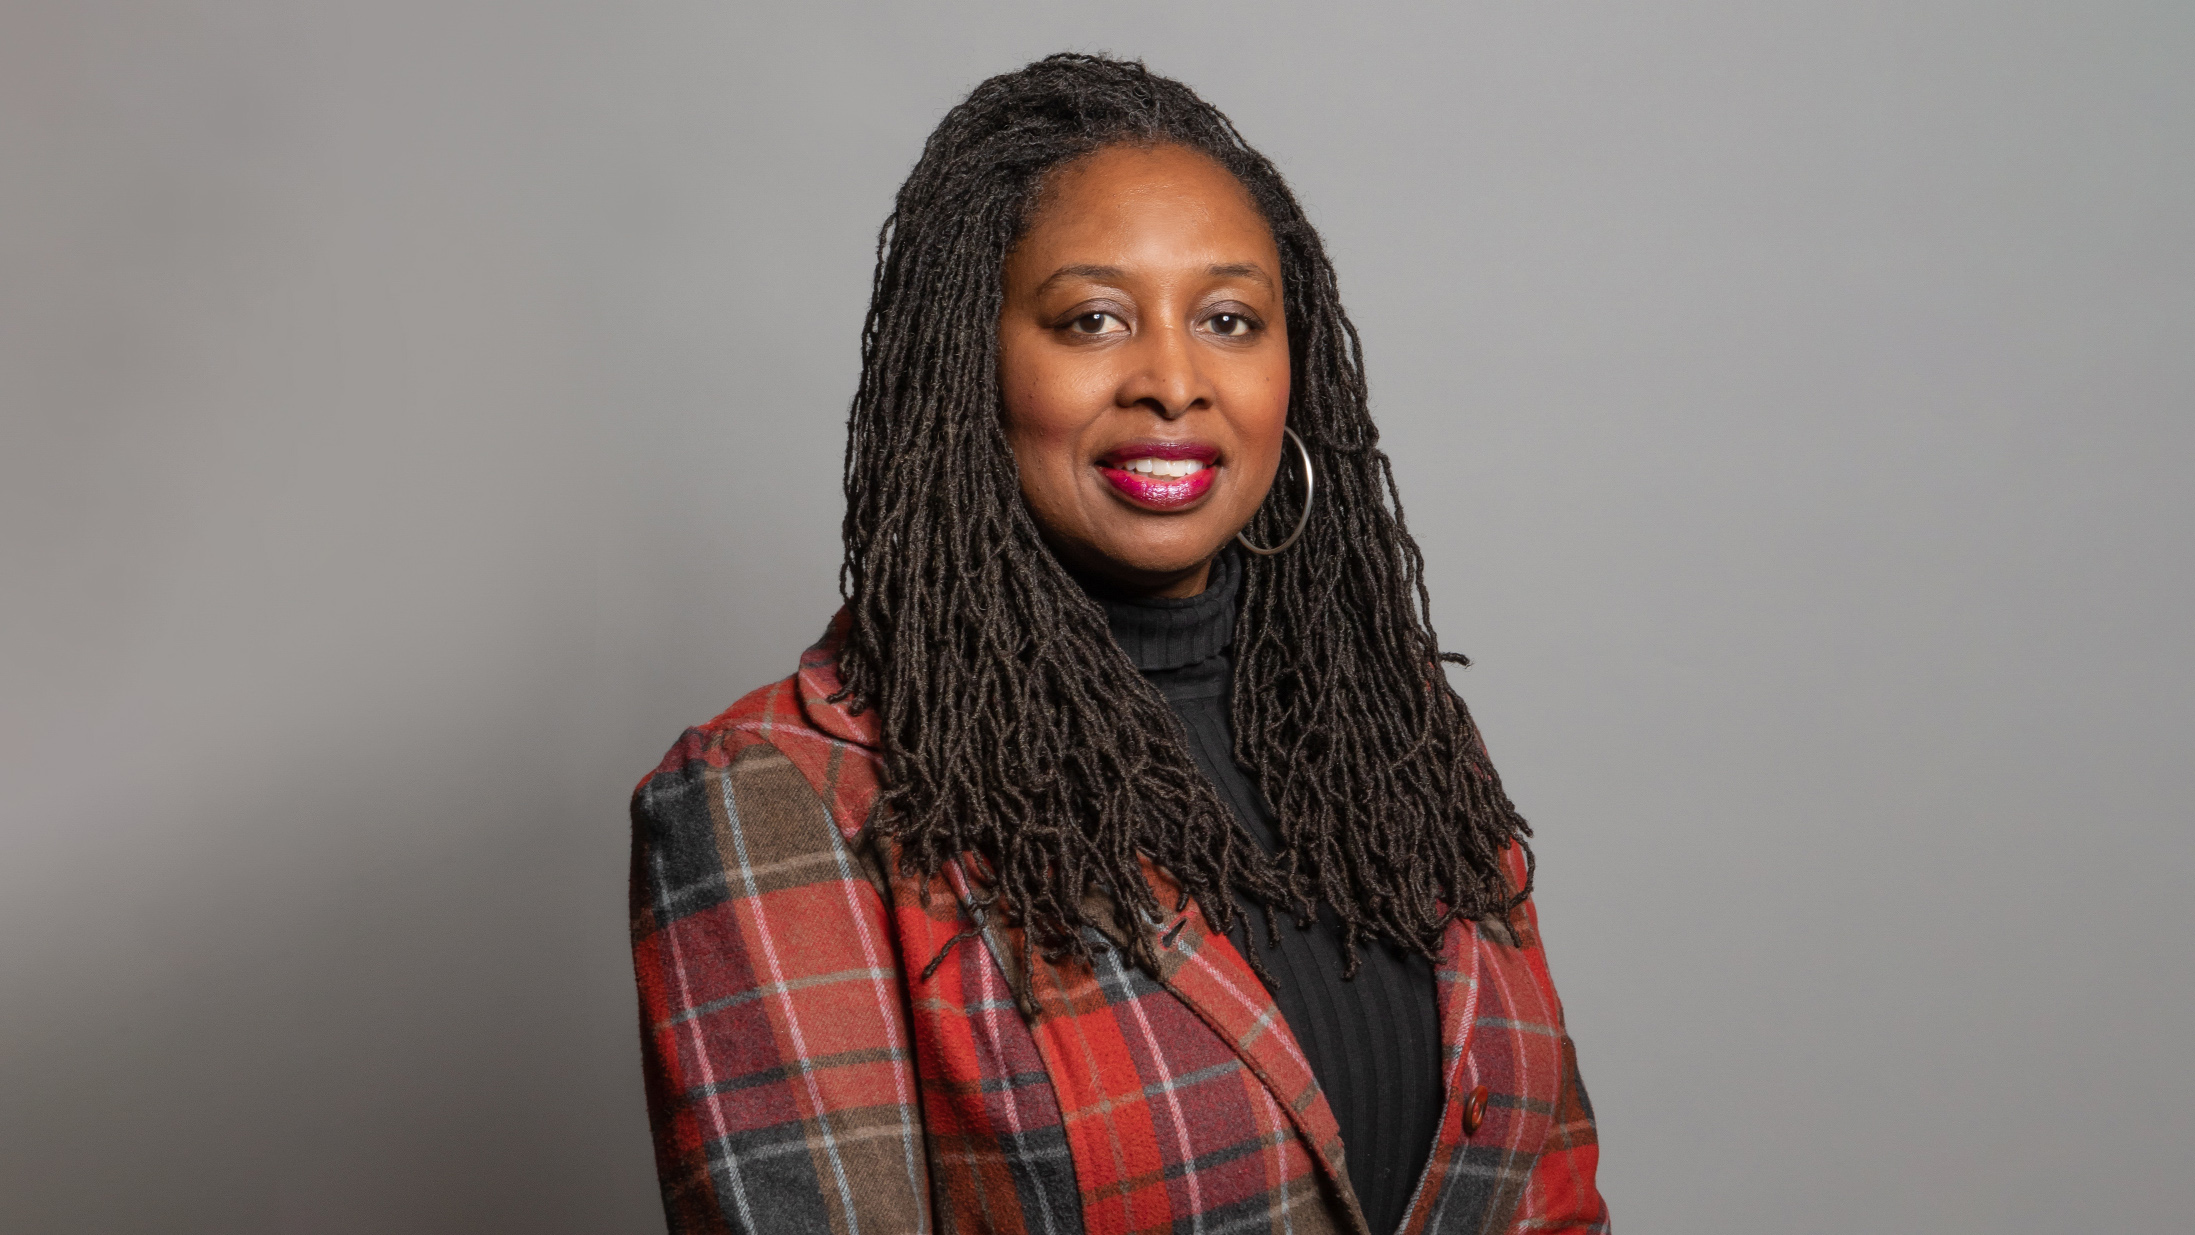 Dawn Butler, Member of Parliament for Brent Central